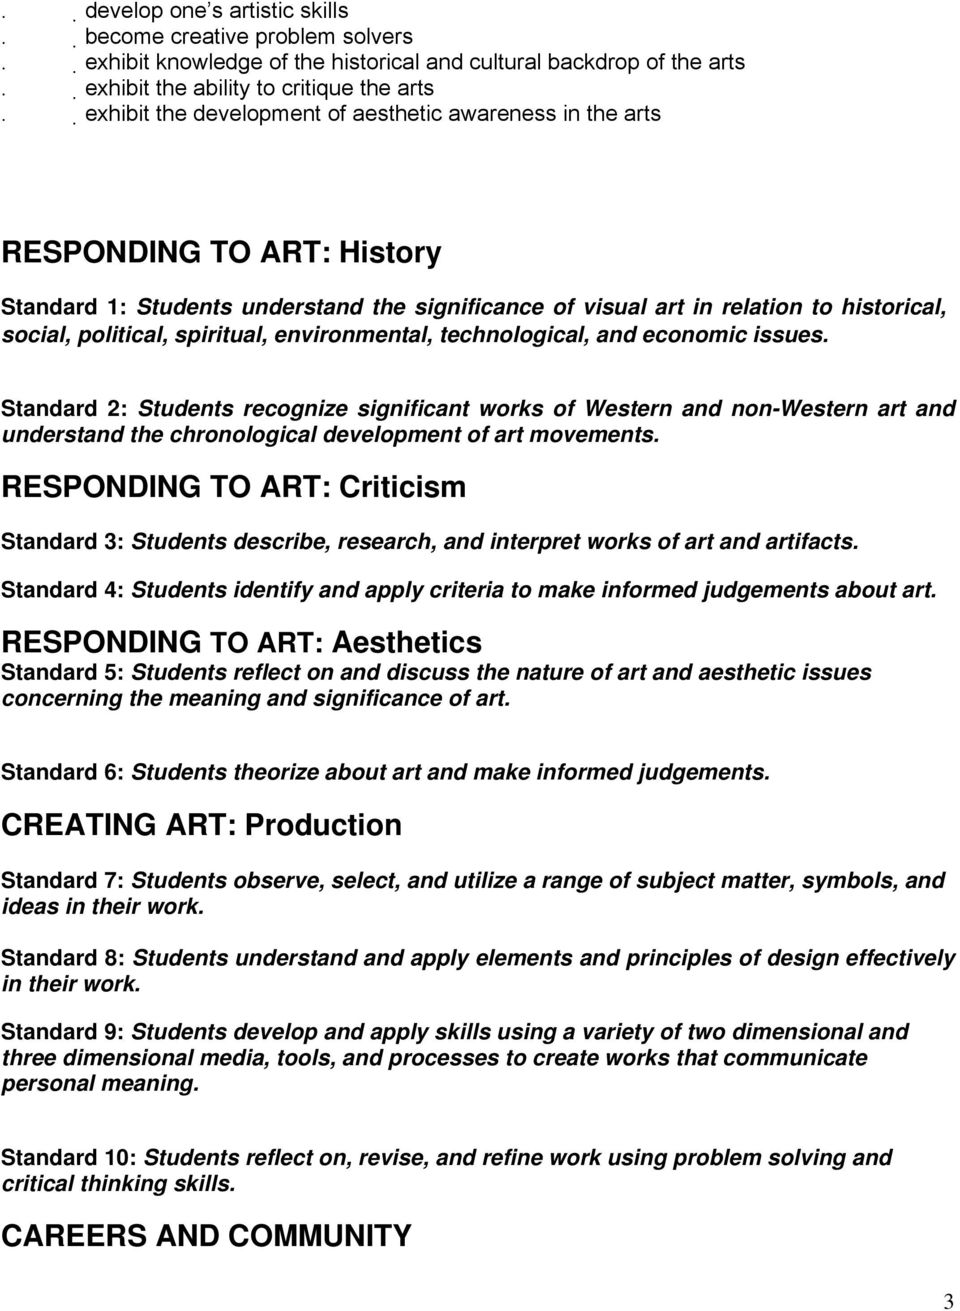 RESPONDING TO ART: Criticism Standard 3: Students describe, research, and interpret works of art and artifacts.